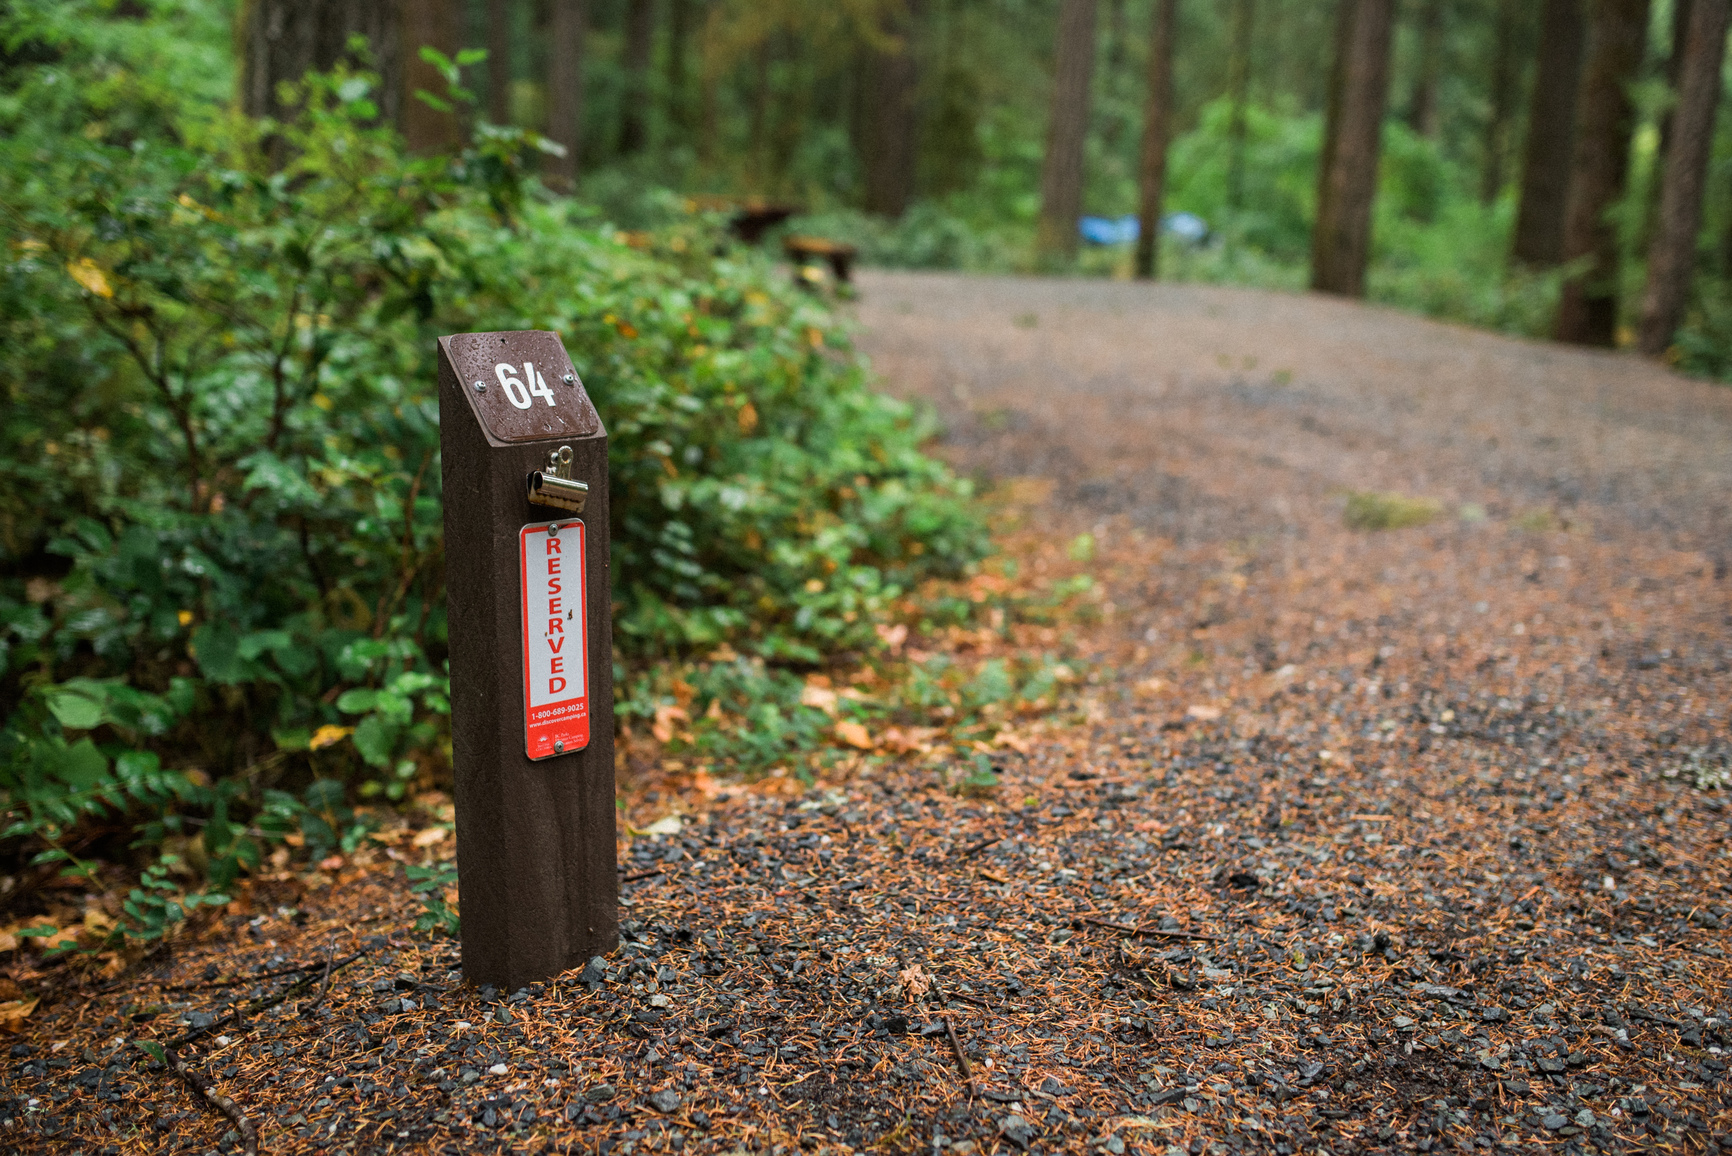 The signpost of campsite 54 with a reserved sticker